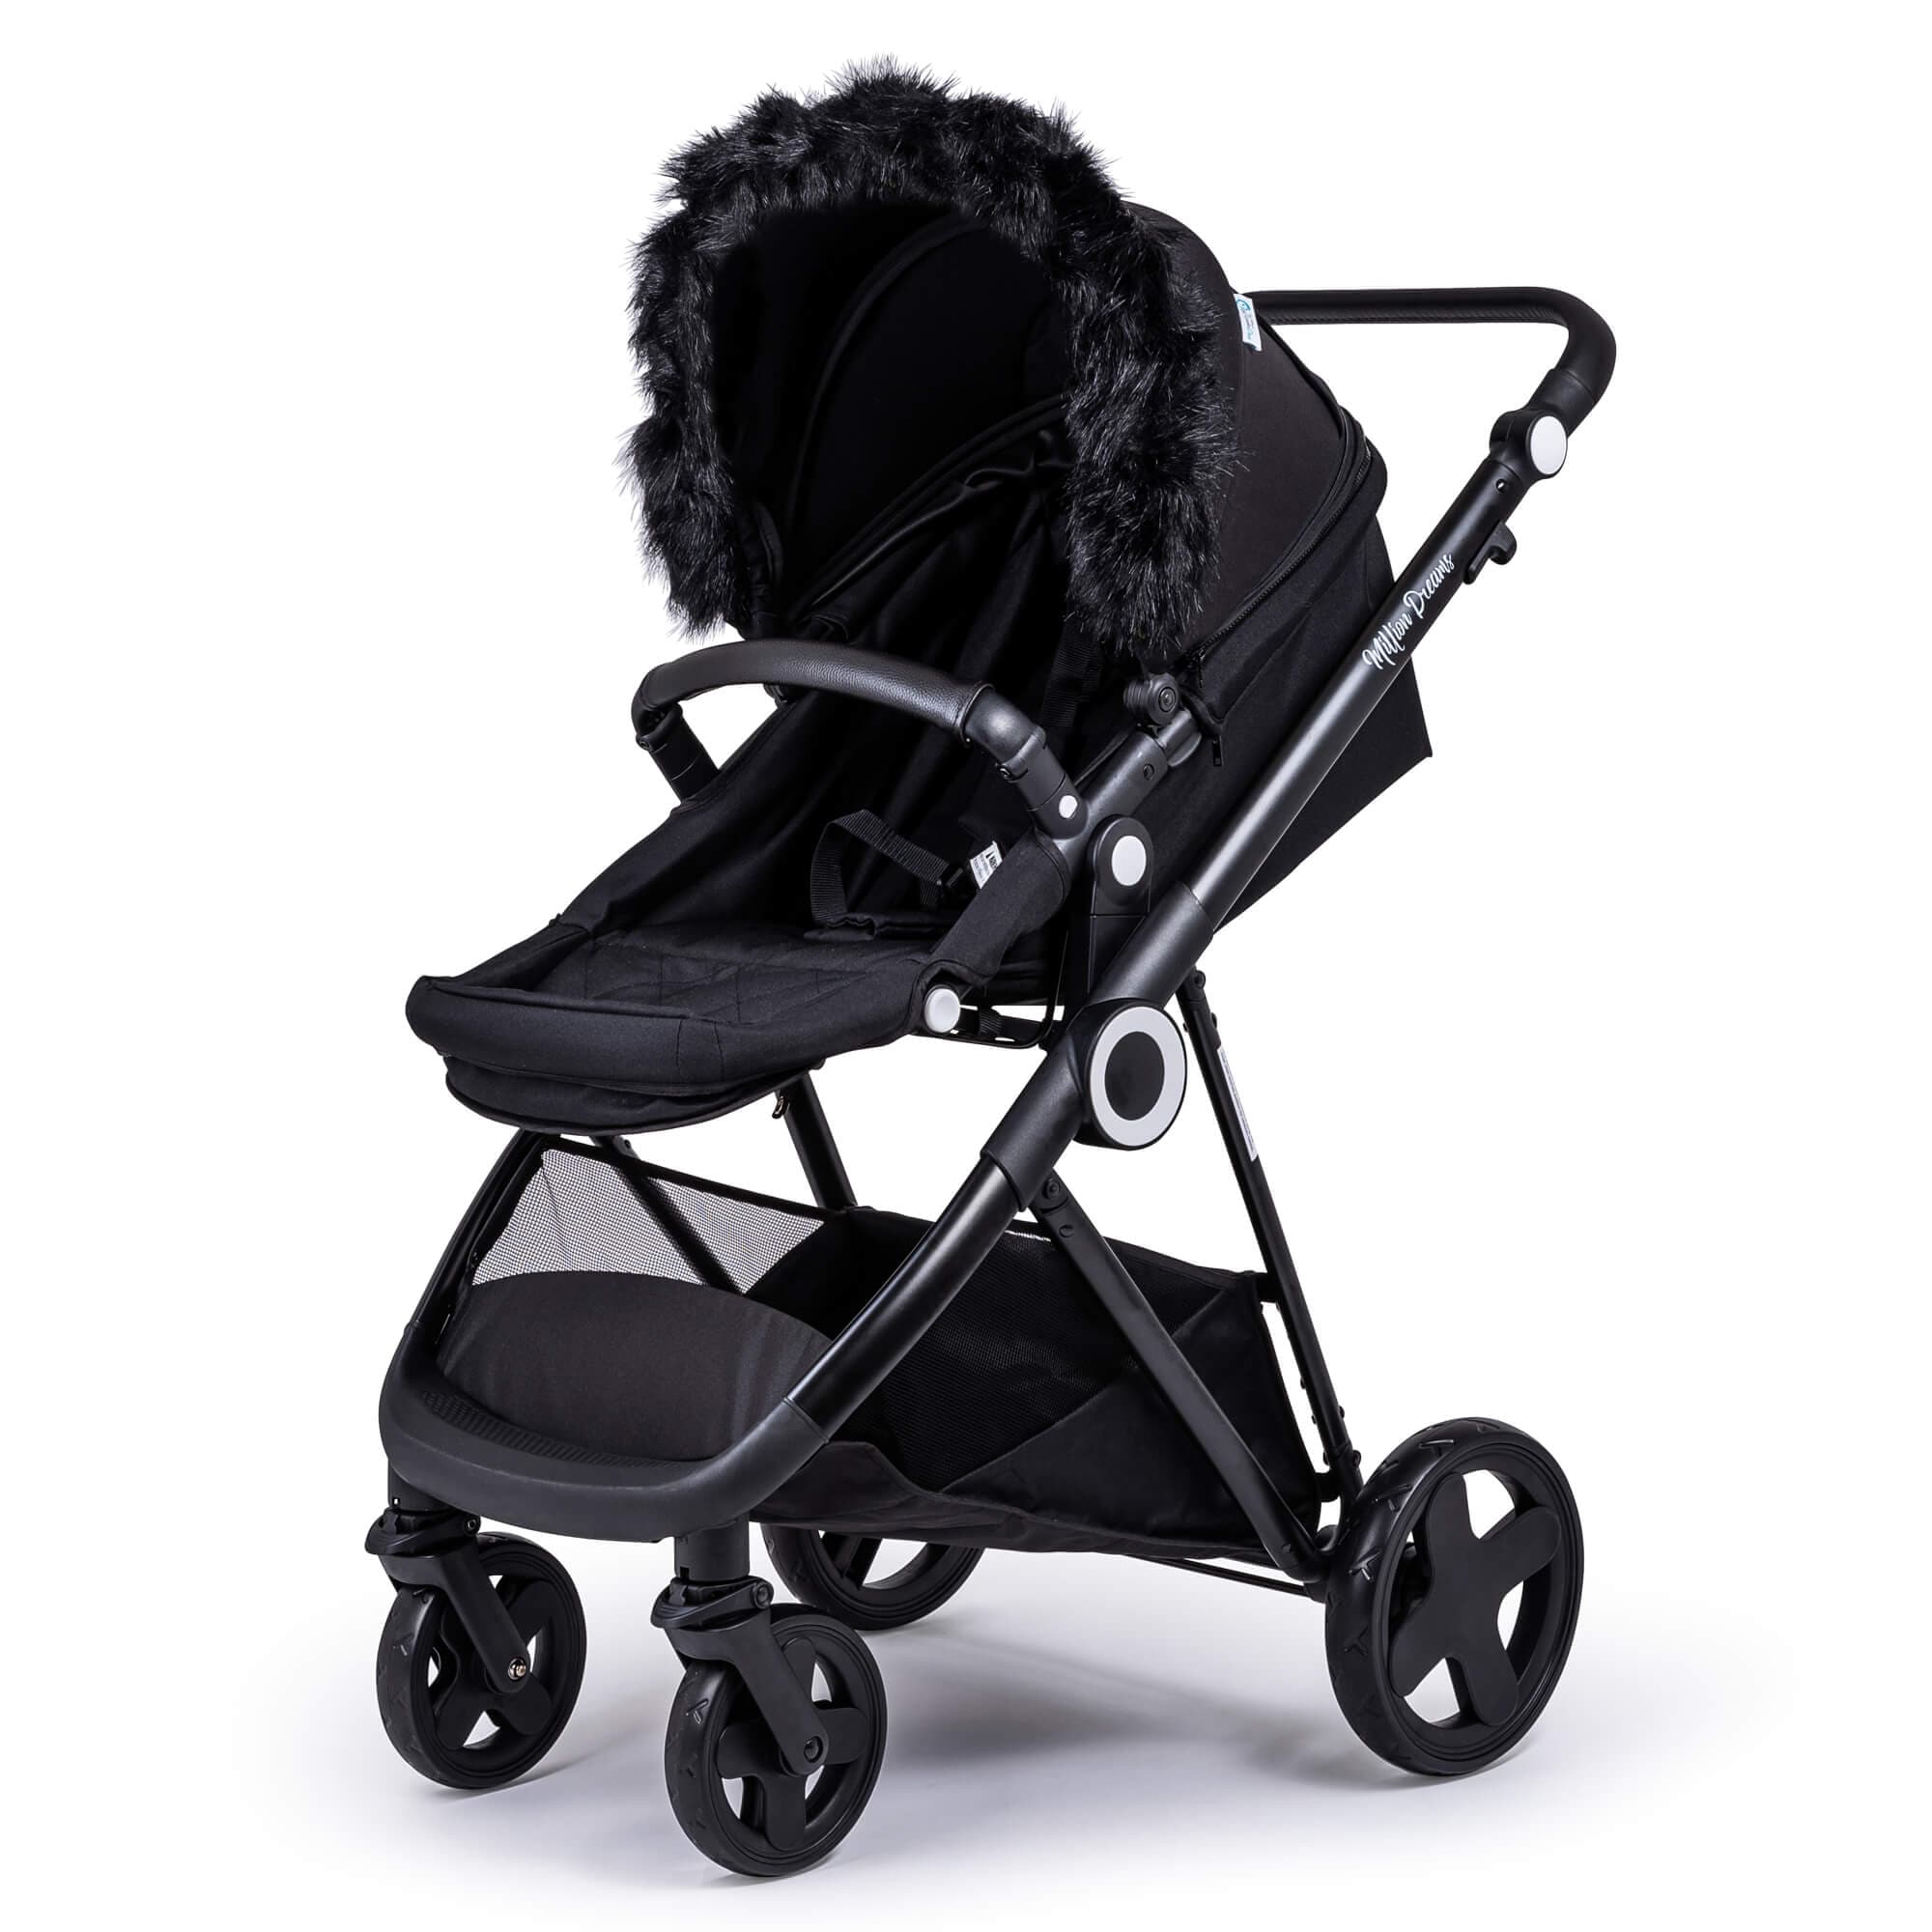 Pram Fur Hood Trim Attachment for Pushchair Compatible with Mamas & Papas - Black / Fits All Models | For Your Little One